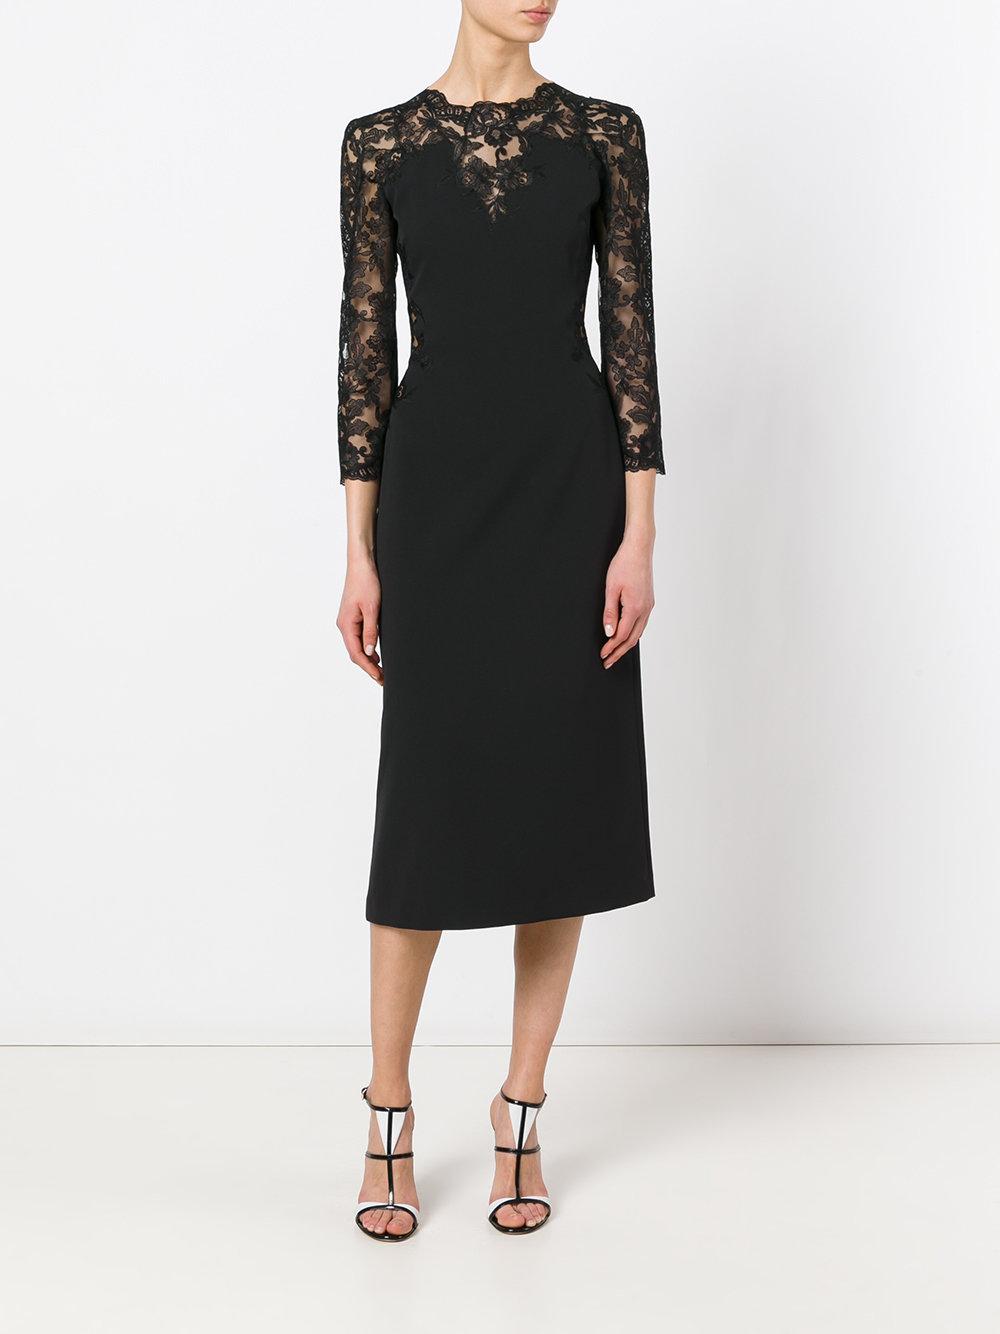 Lyst - Ermanno Scervino Lace Sleeve Mid-length Dress in Black